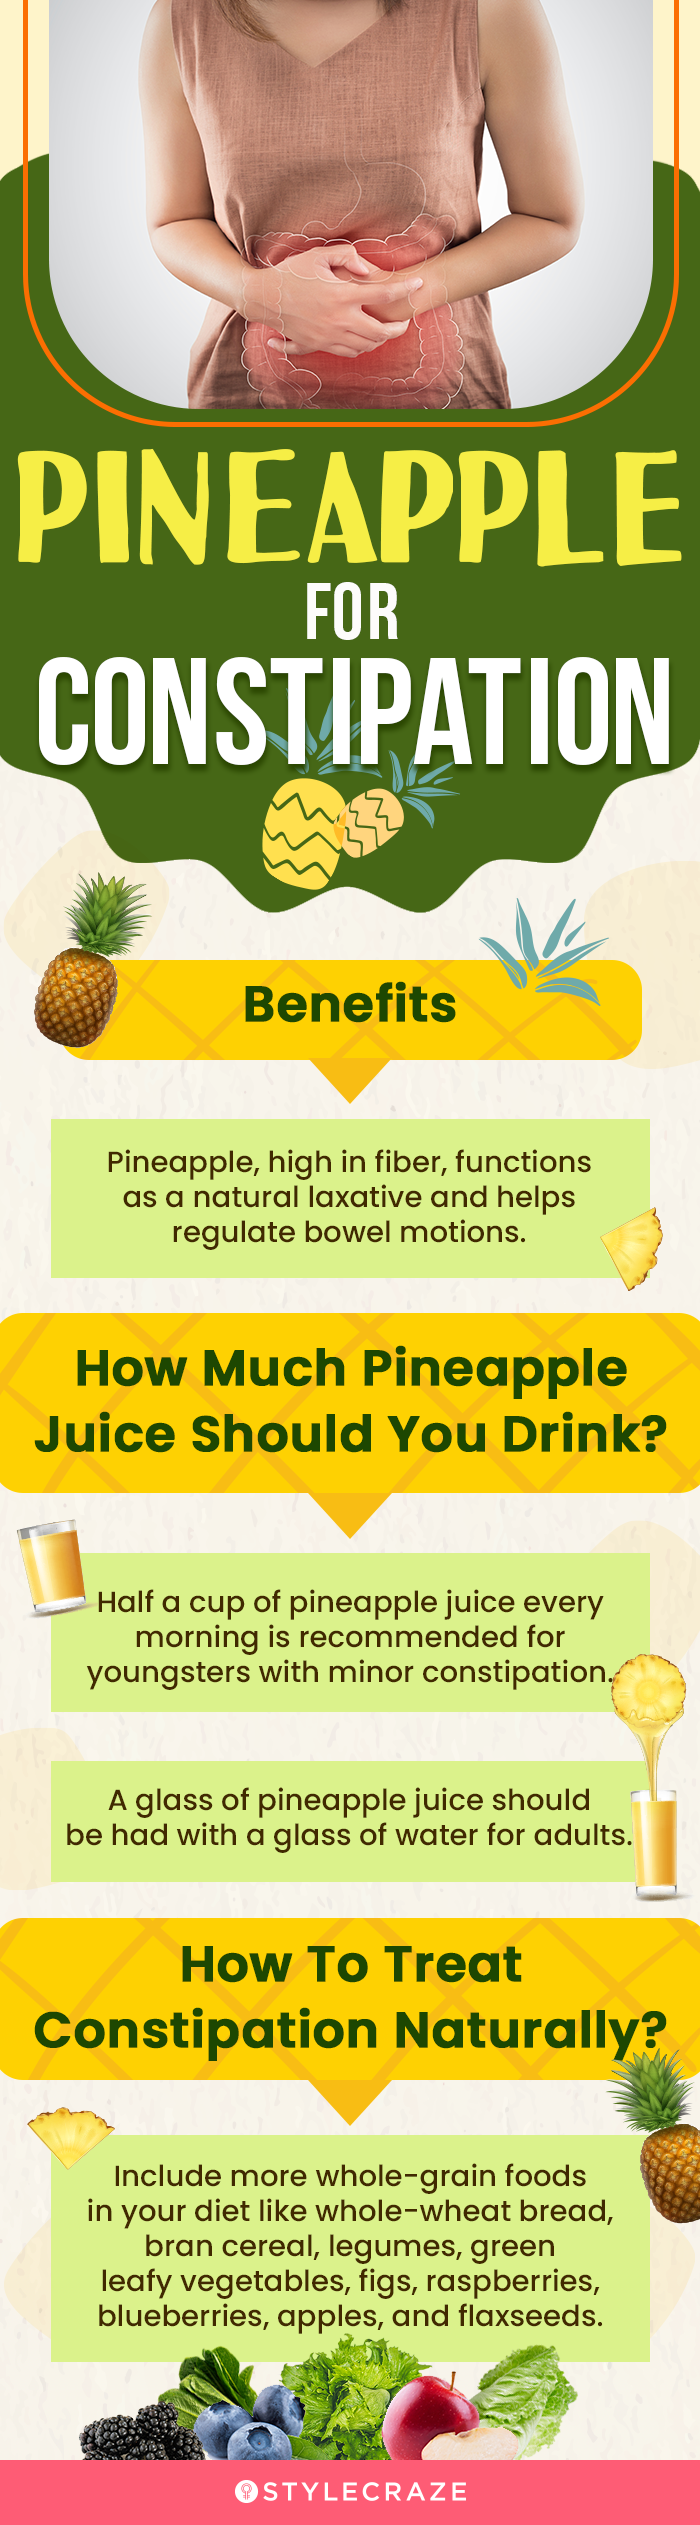 pineapple for constipation (infographic)